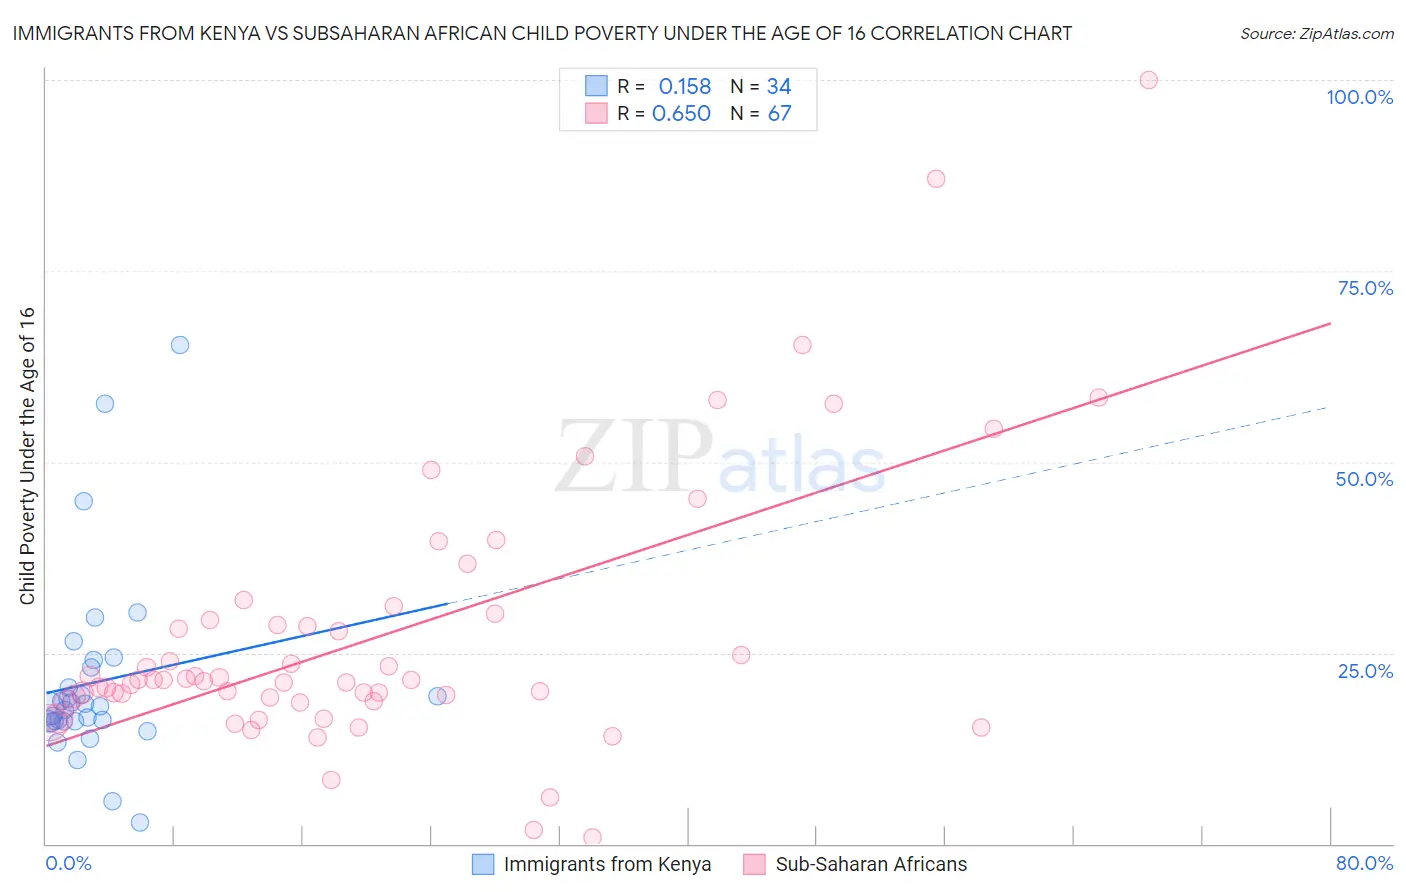 Immigrants from Kenya vs Subsaharan African Child Poverty Under the Age of 16